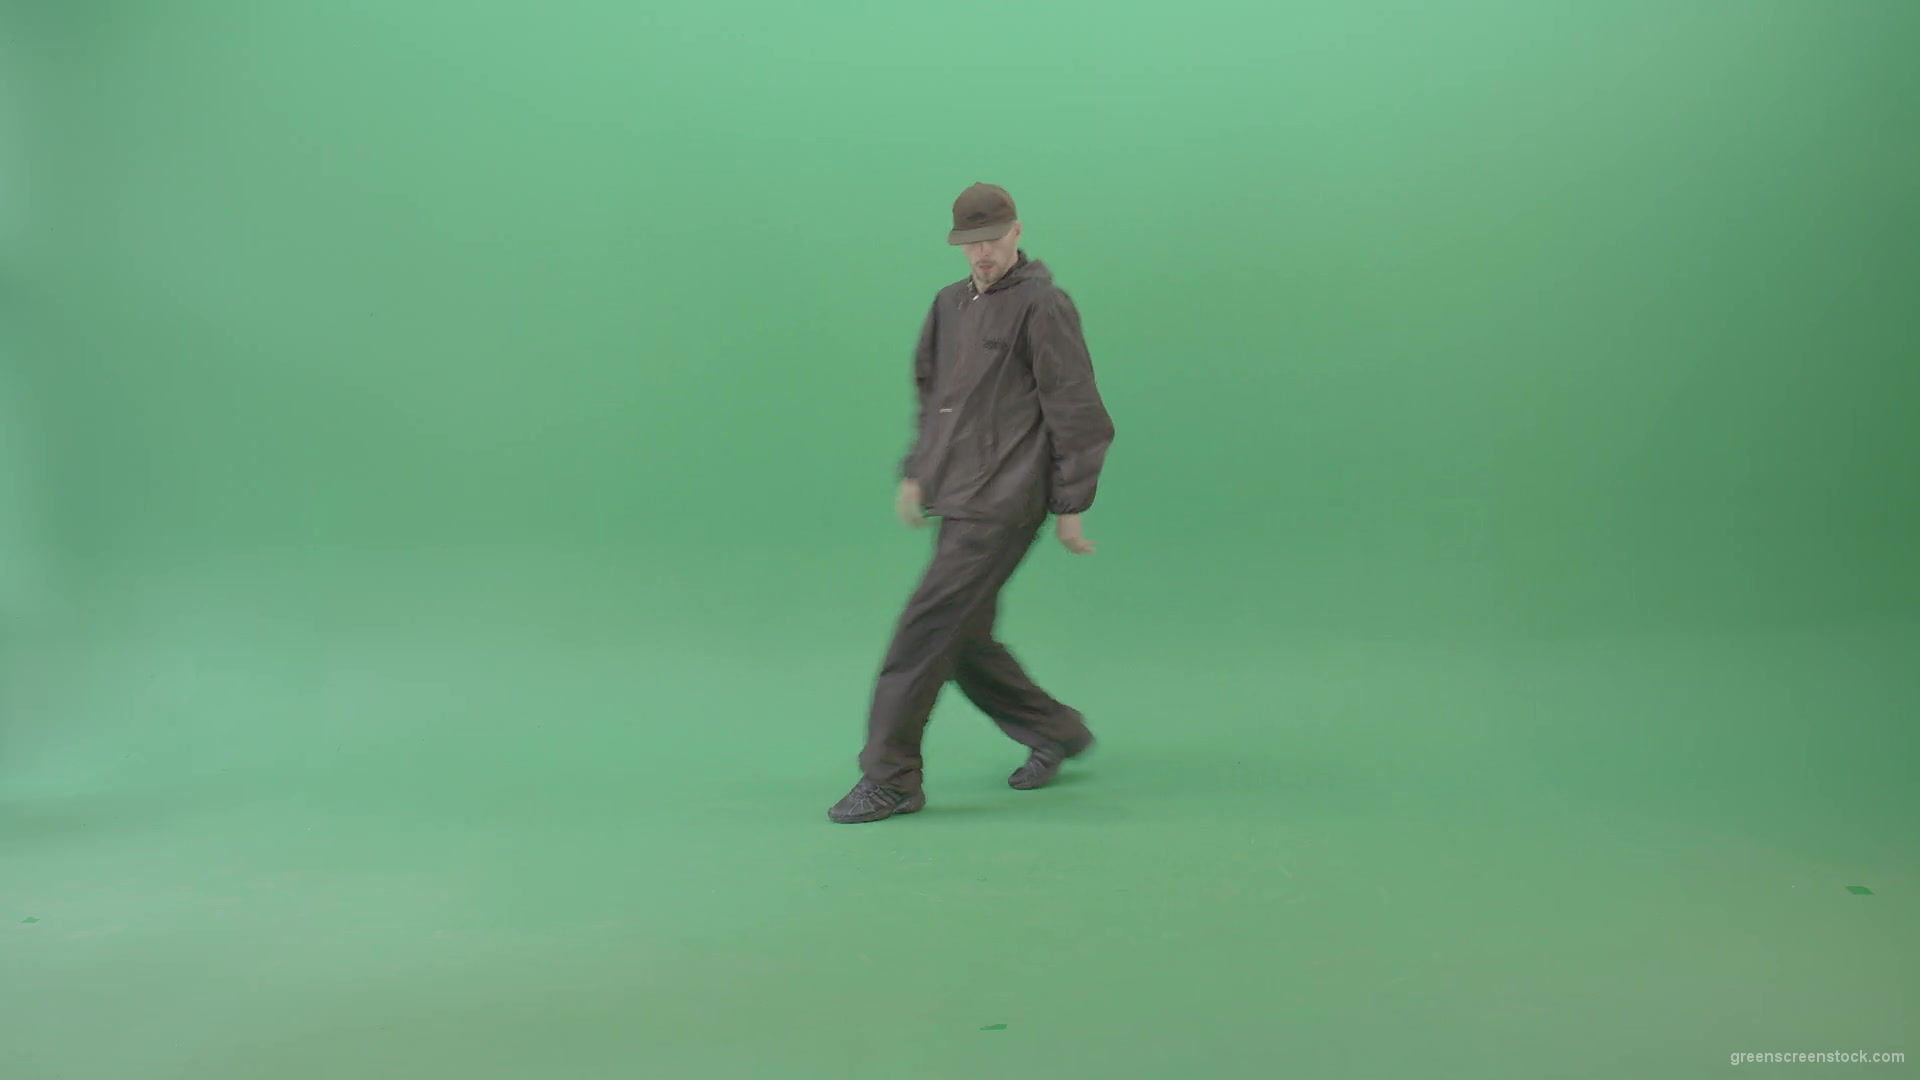 Athlete-Man-making-Air-freeze-on-hand-breaking-on-green-screen-4K-Video-Footage-1920_004 Green Screen Stock